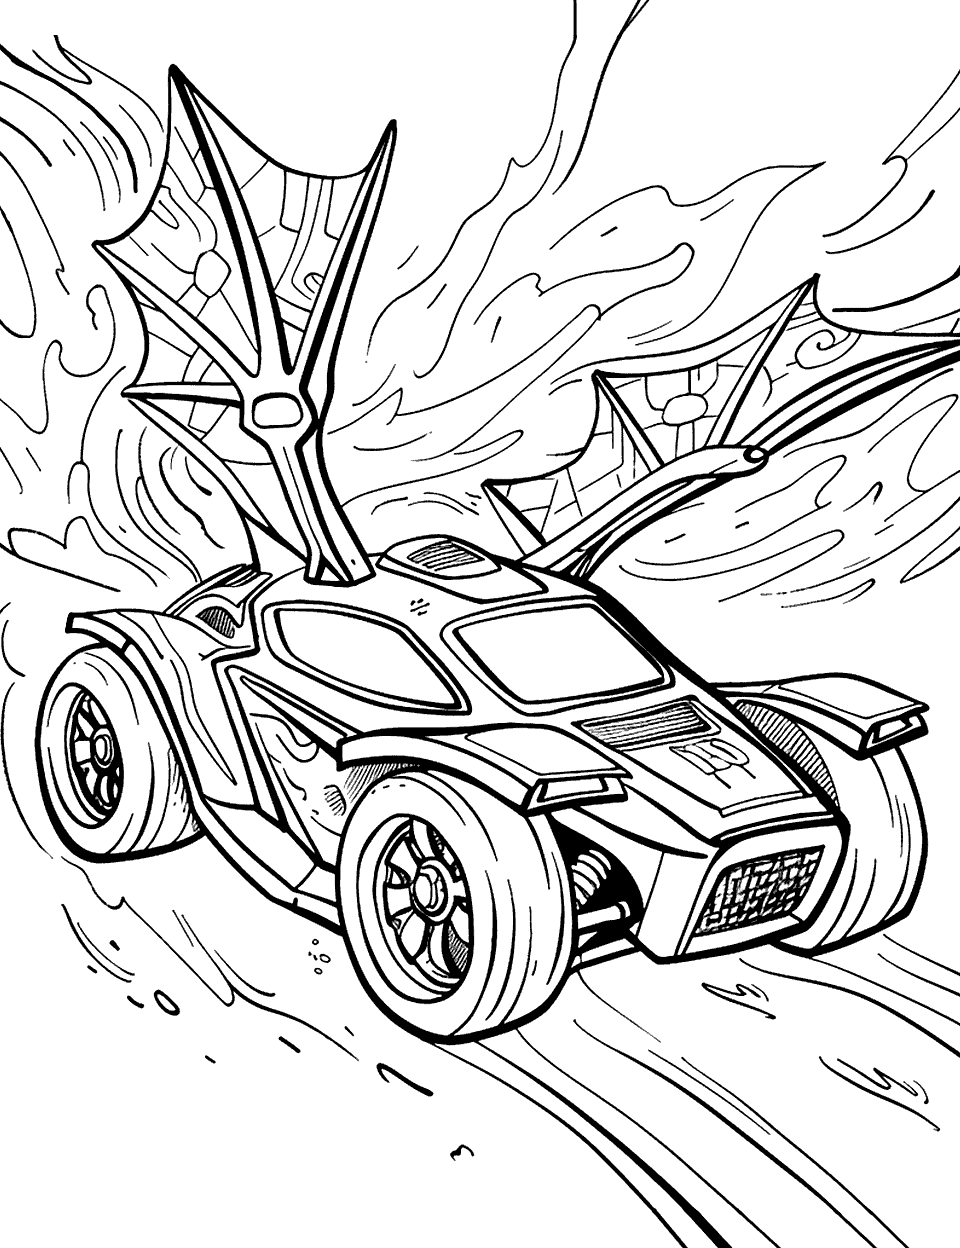 Dragon Blaster Adventure Coloring Page - A Dragon Blaster car with dragon wings spread wide, racing.